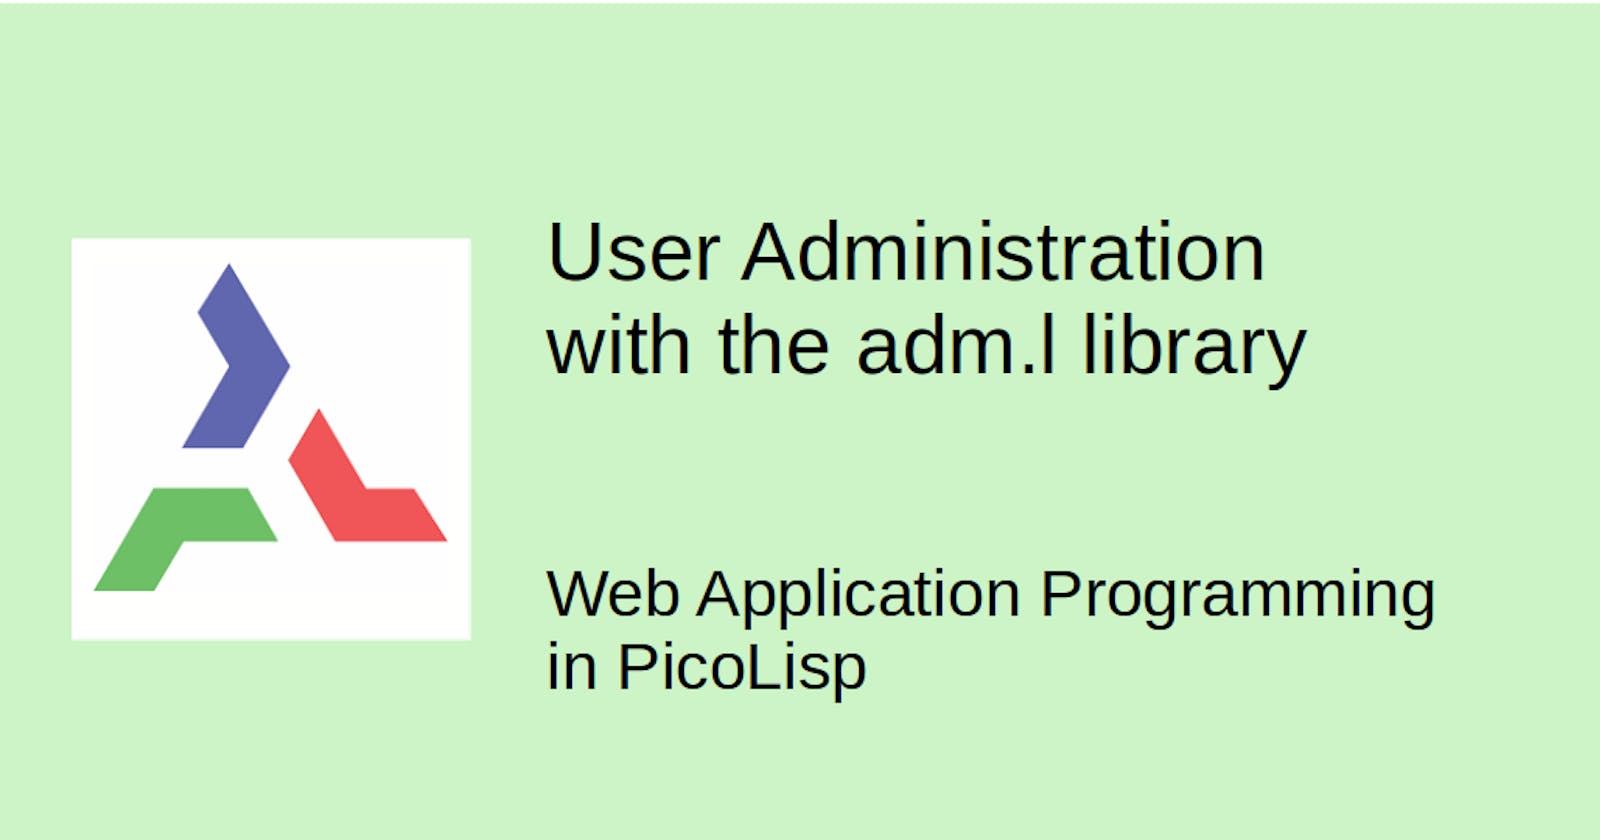 User Administration with the "adm.l" library